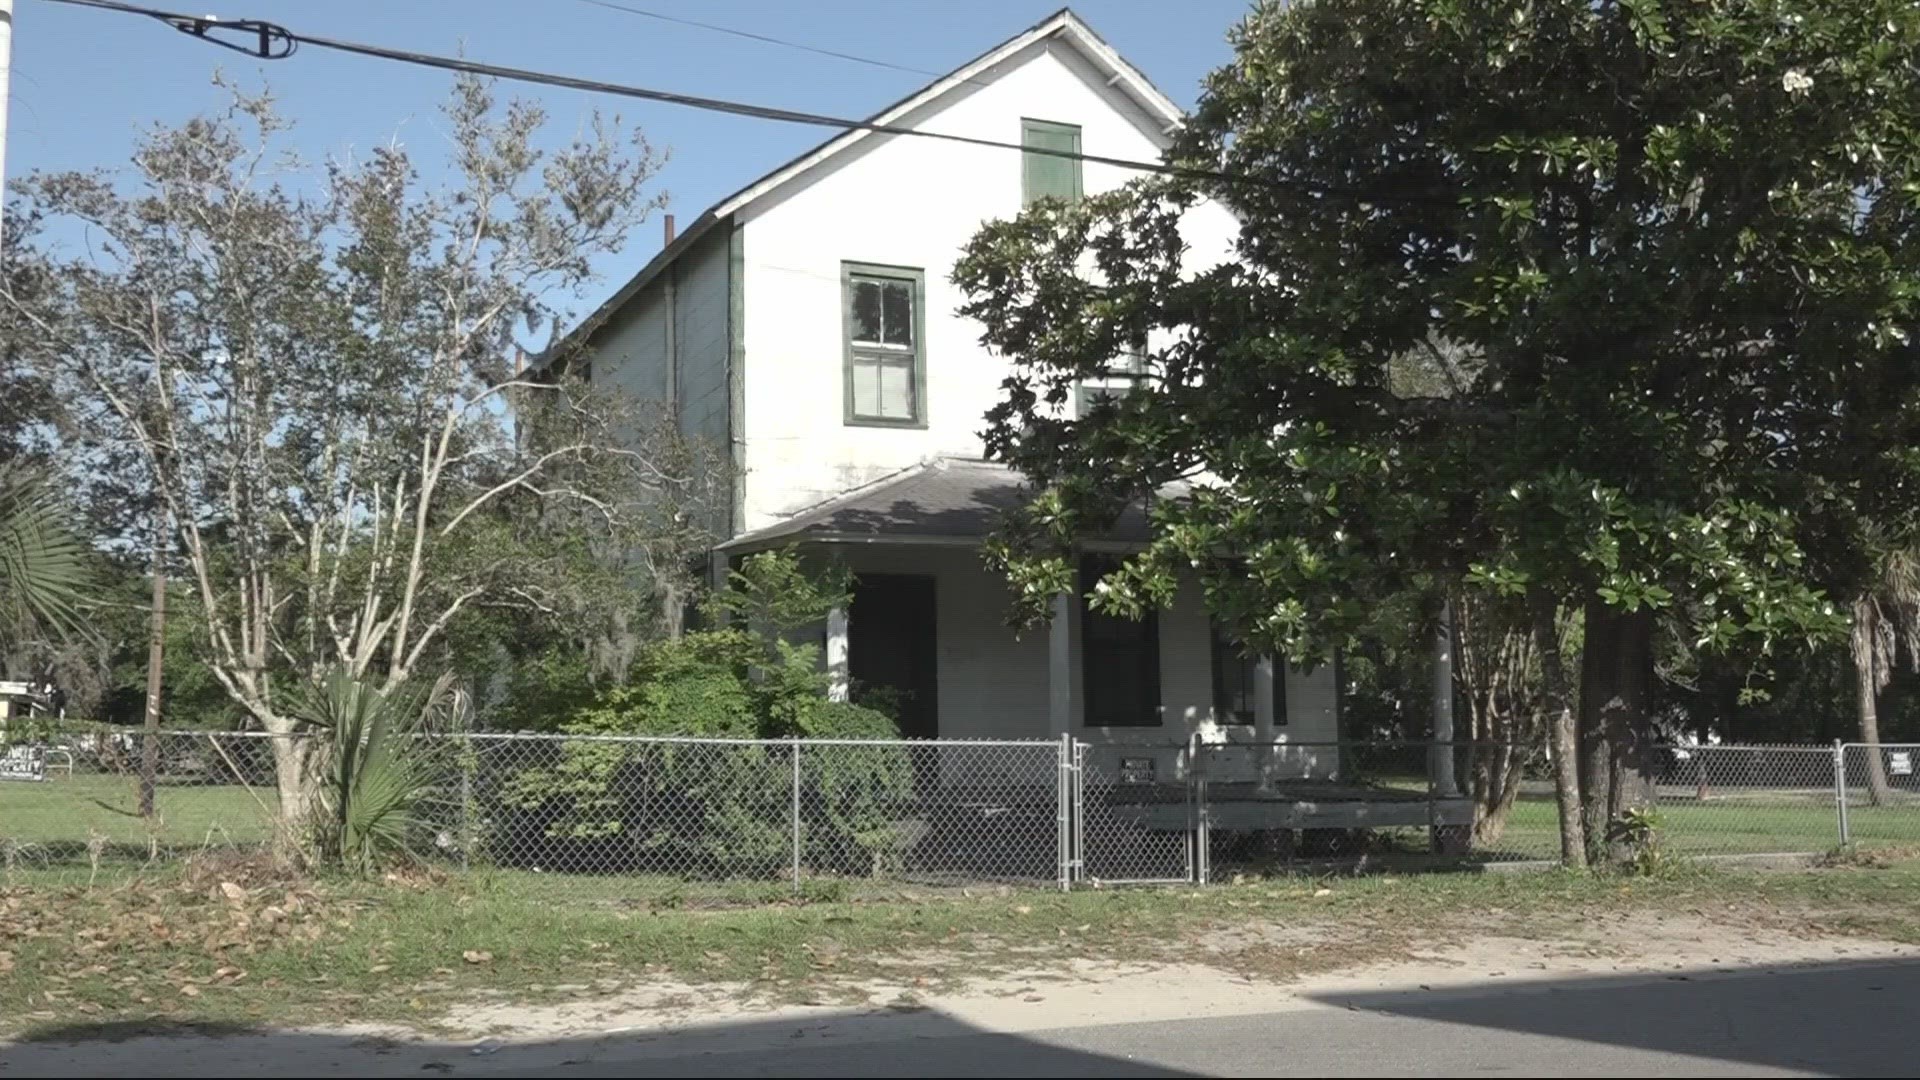 Fernandina Beach's Tringali Homes will be demolished and replaced with townhomes in a decision approved by the Fernandina Beach City Commission Tuesday.